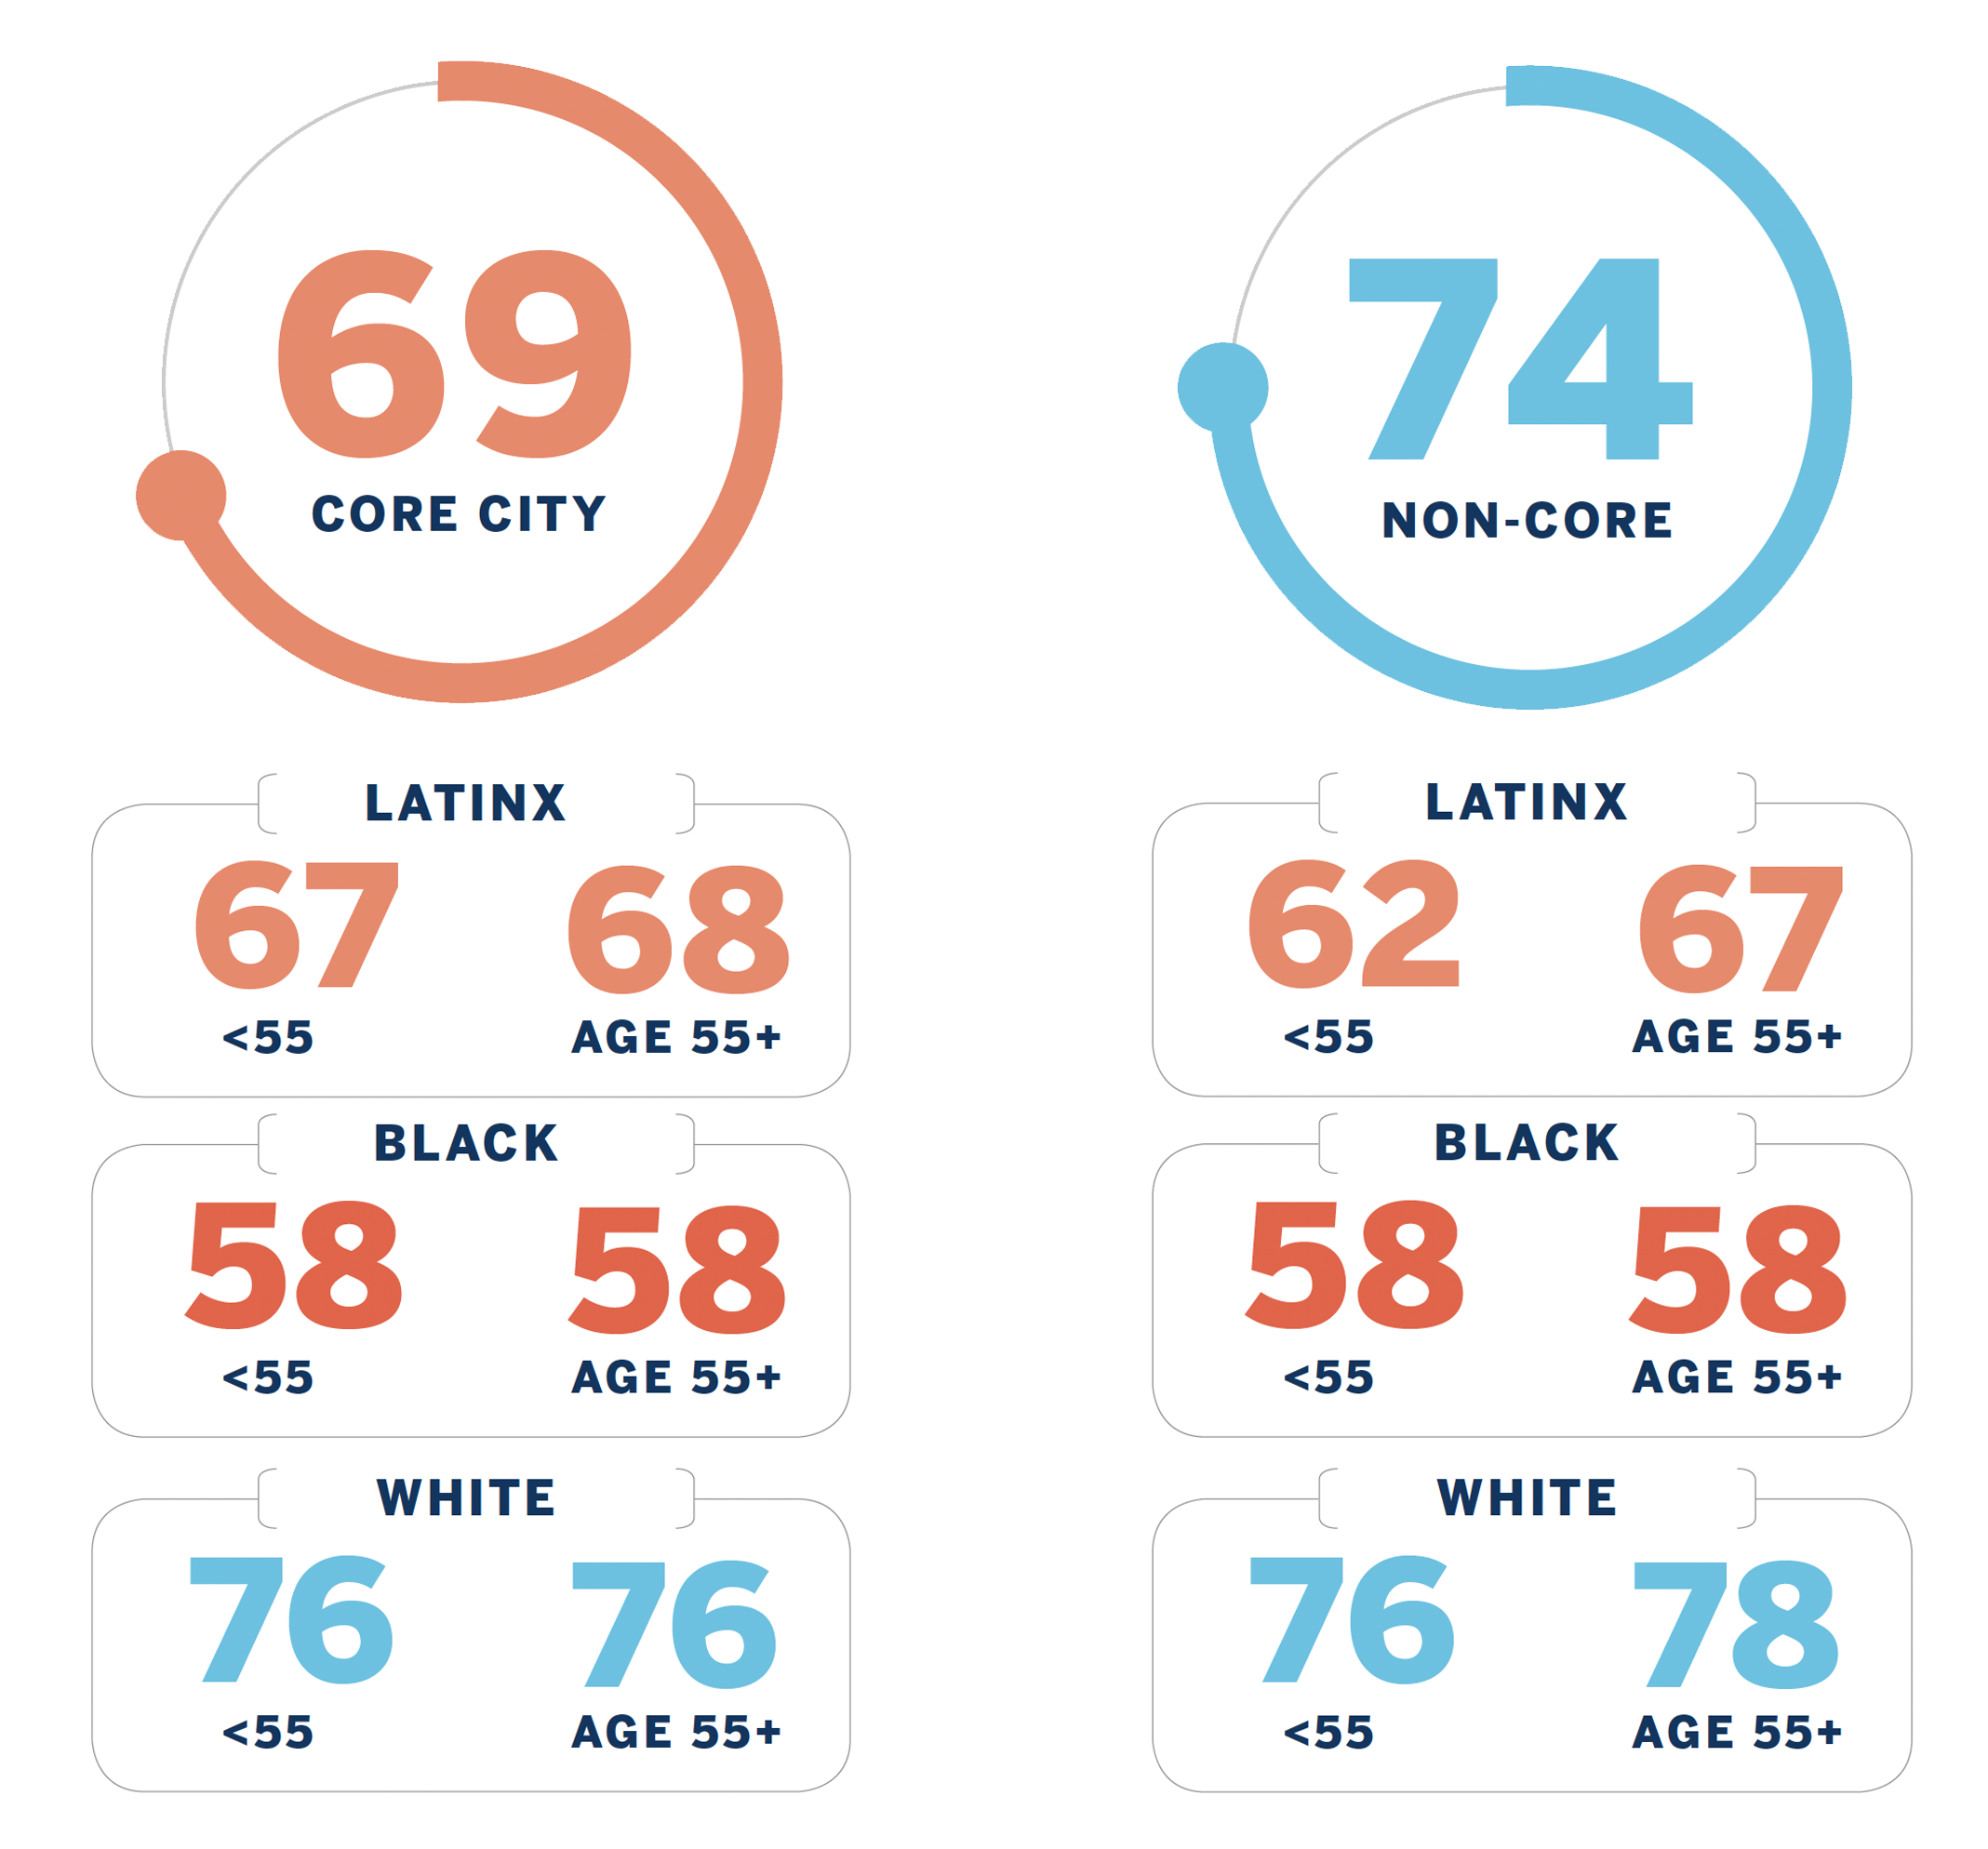 Chart breakdown: Core City: 69 (broken down by Latinx, Black, and White ages less than and over 55) Non-Core: 74 (broken down by Latinx, Black, and White ages less than and over 55)